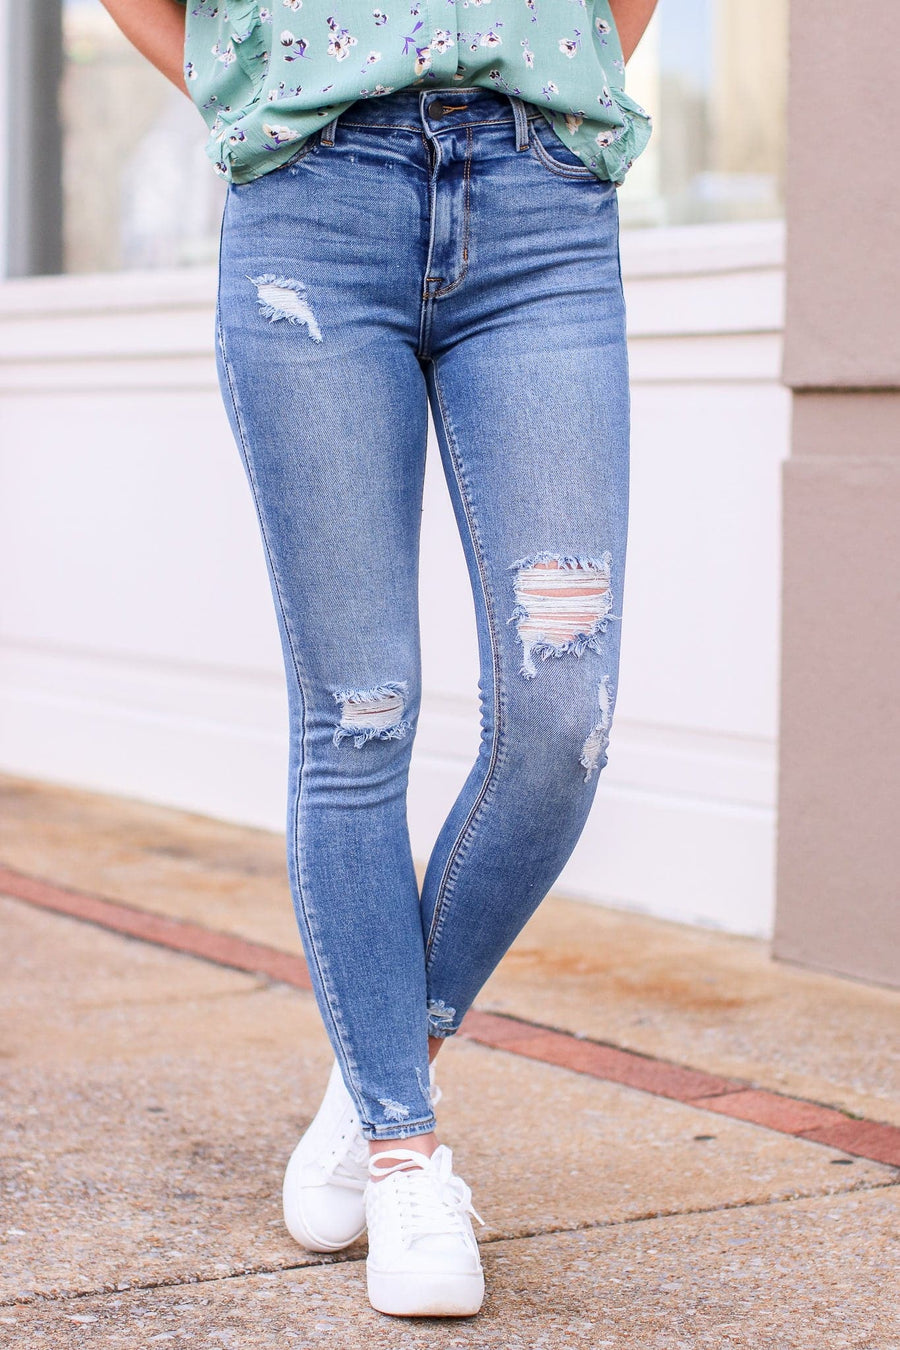 1 / Medium Jaslynn High Rise Distressed Jeans - FINAL SALE - Madison and Mallory